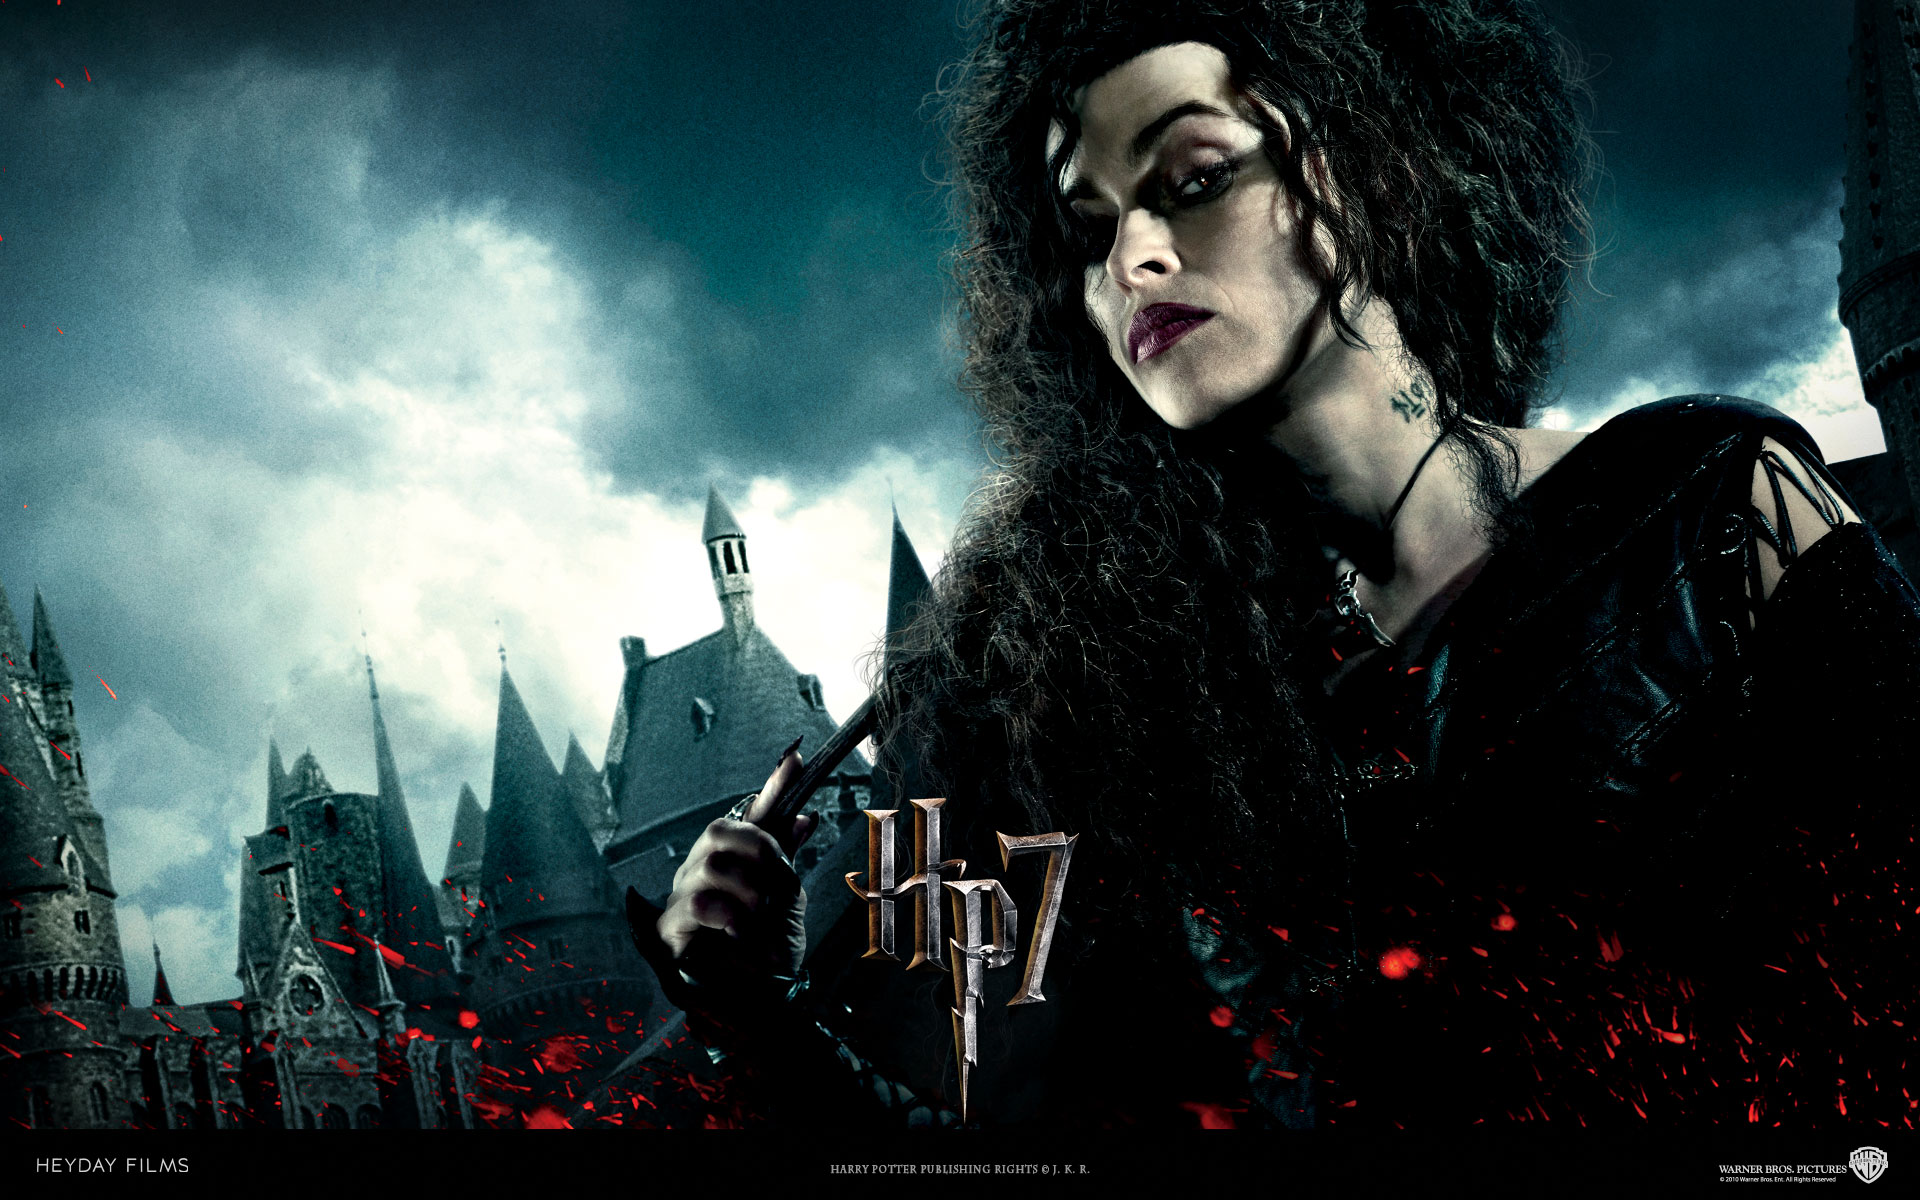  Lestrange from Harry Potter and the Deathly Hallows Desktop Wallpaper